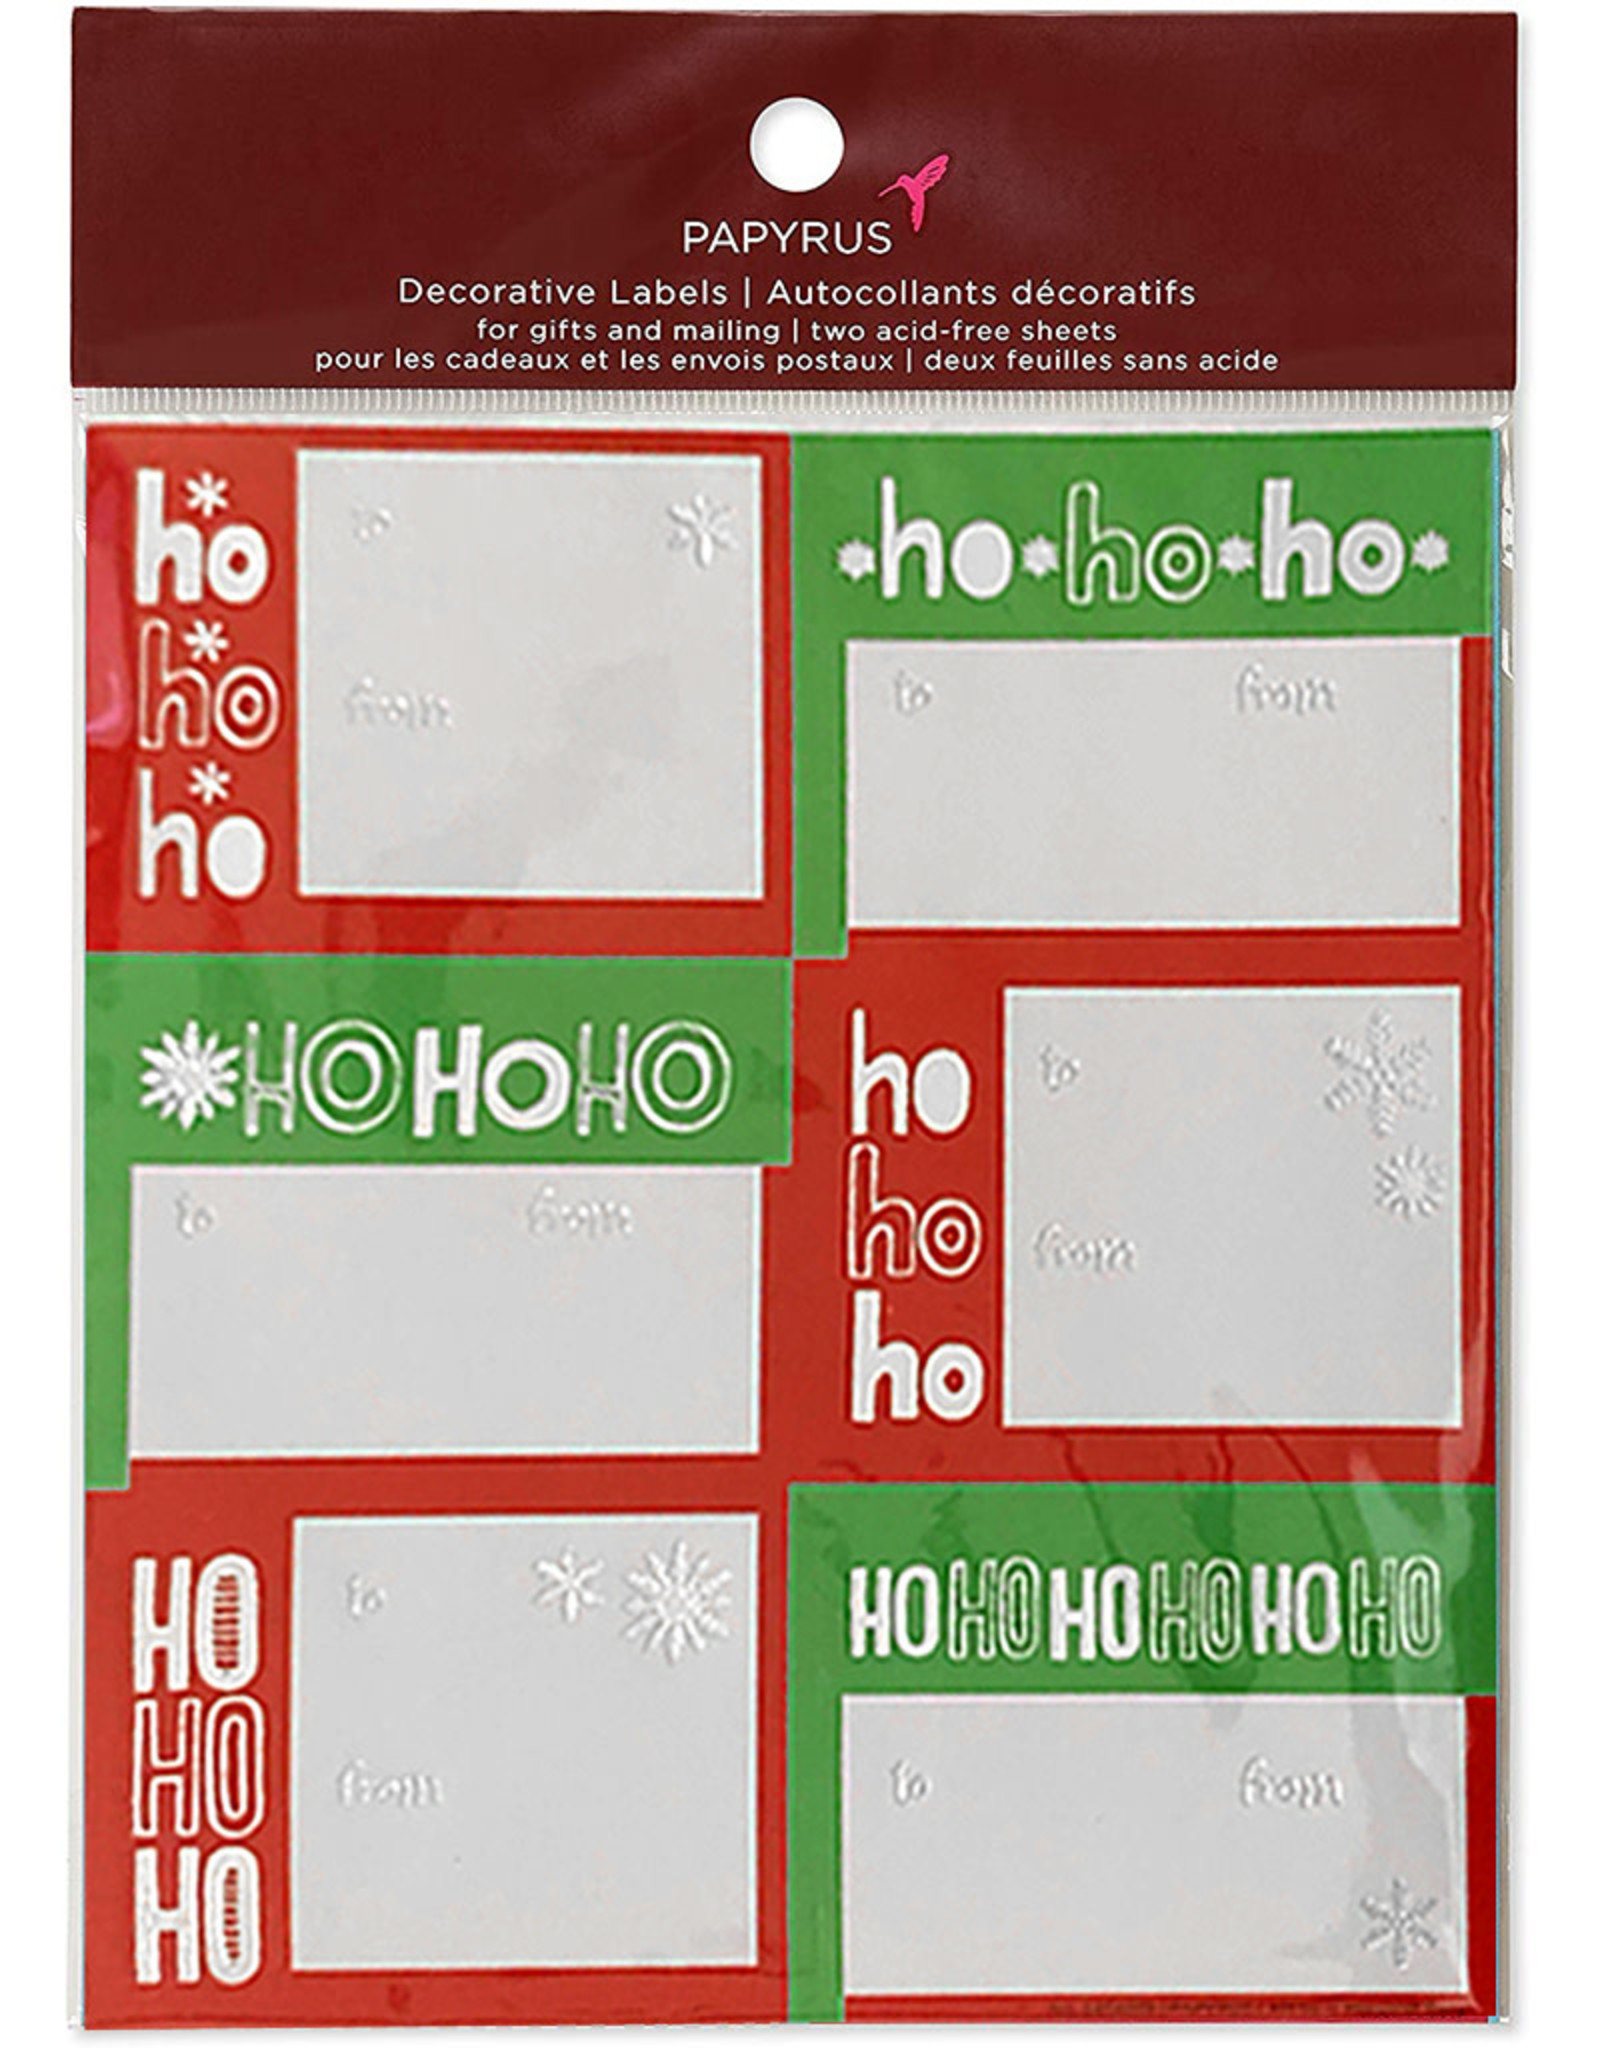 PAPYRUS® Christmas Gift Labels 12 To From Ho Ho Ho Gift Labels 3x2